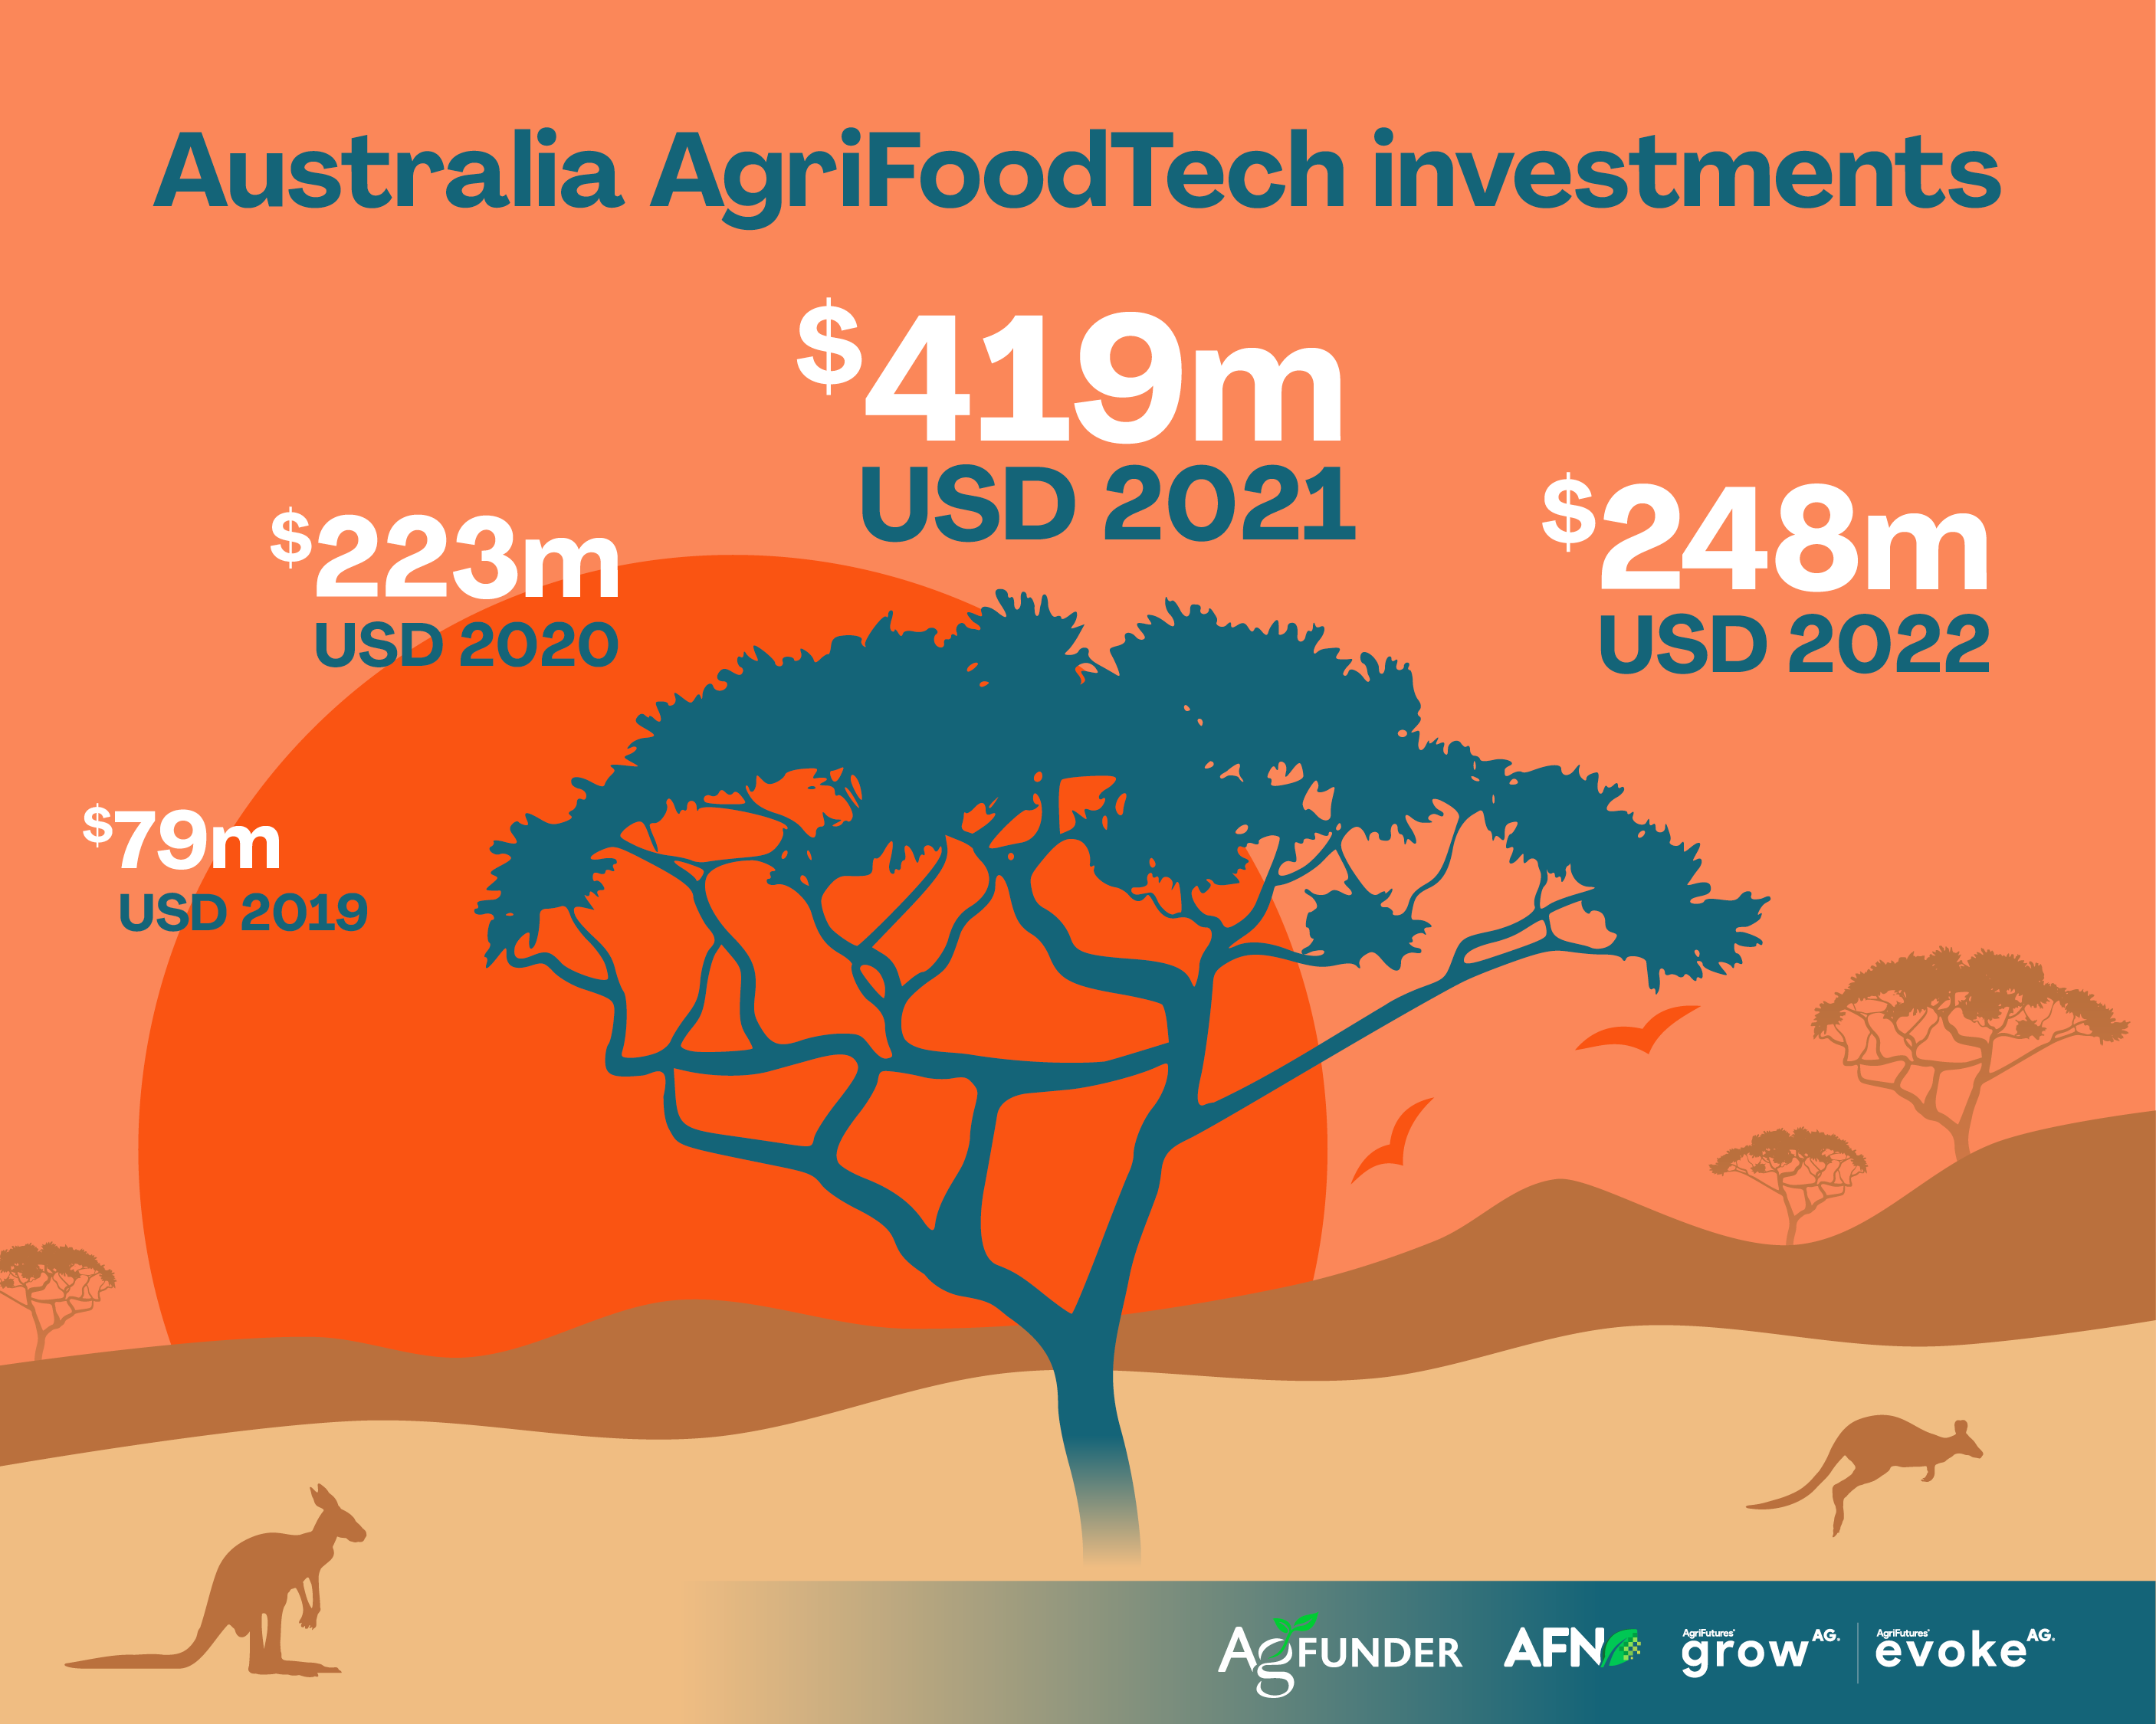 An infographic outlining Australia's AgrifooTech Investment